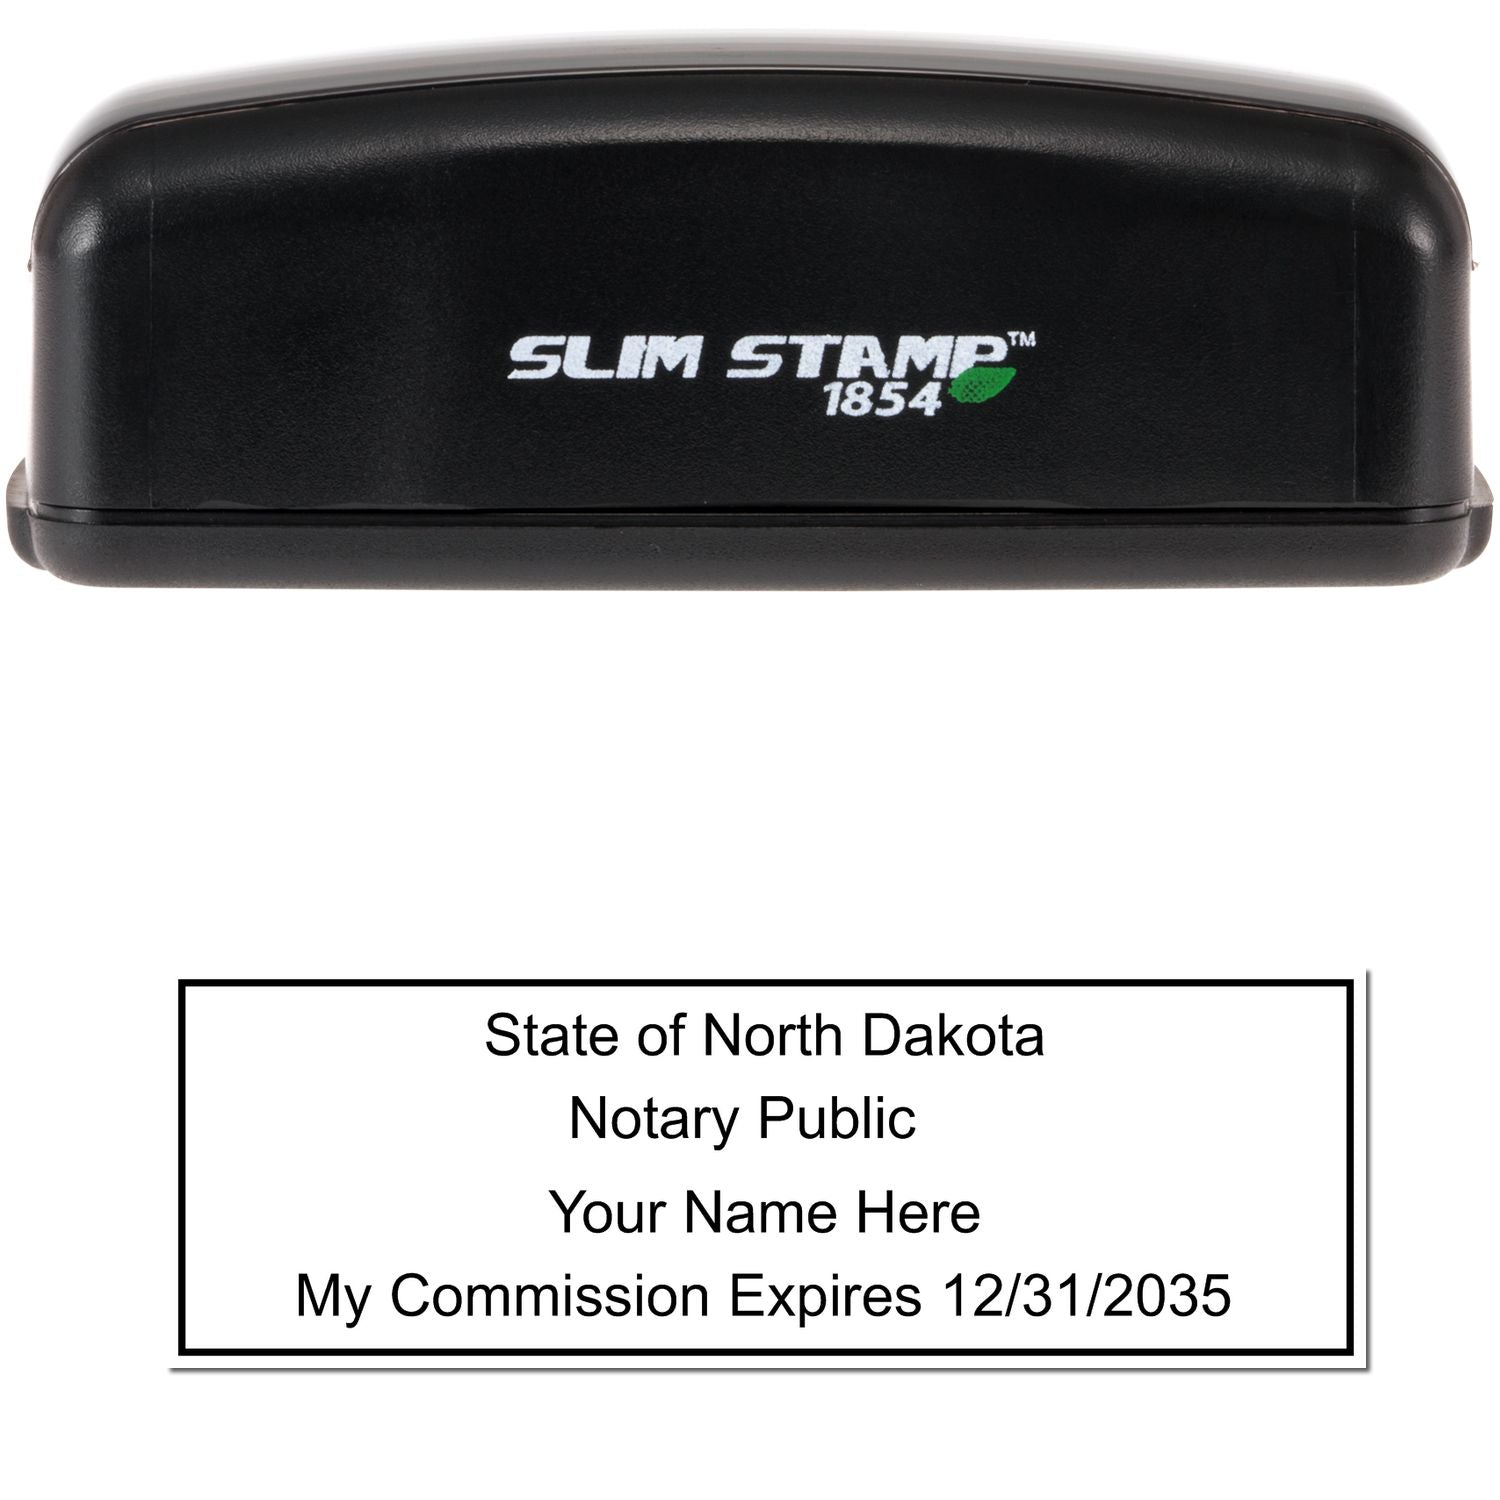 The main image for the Slim Pre-Inked Rectangular Notary Stamp for North Dakota depicting a sample of the imprint and electronic files